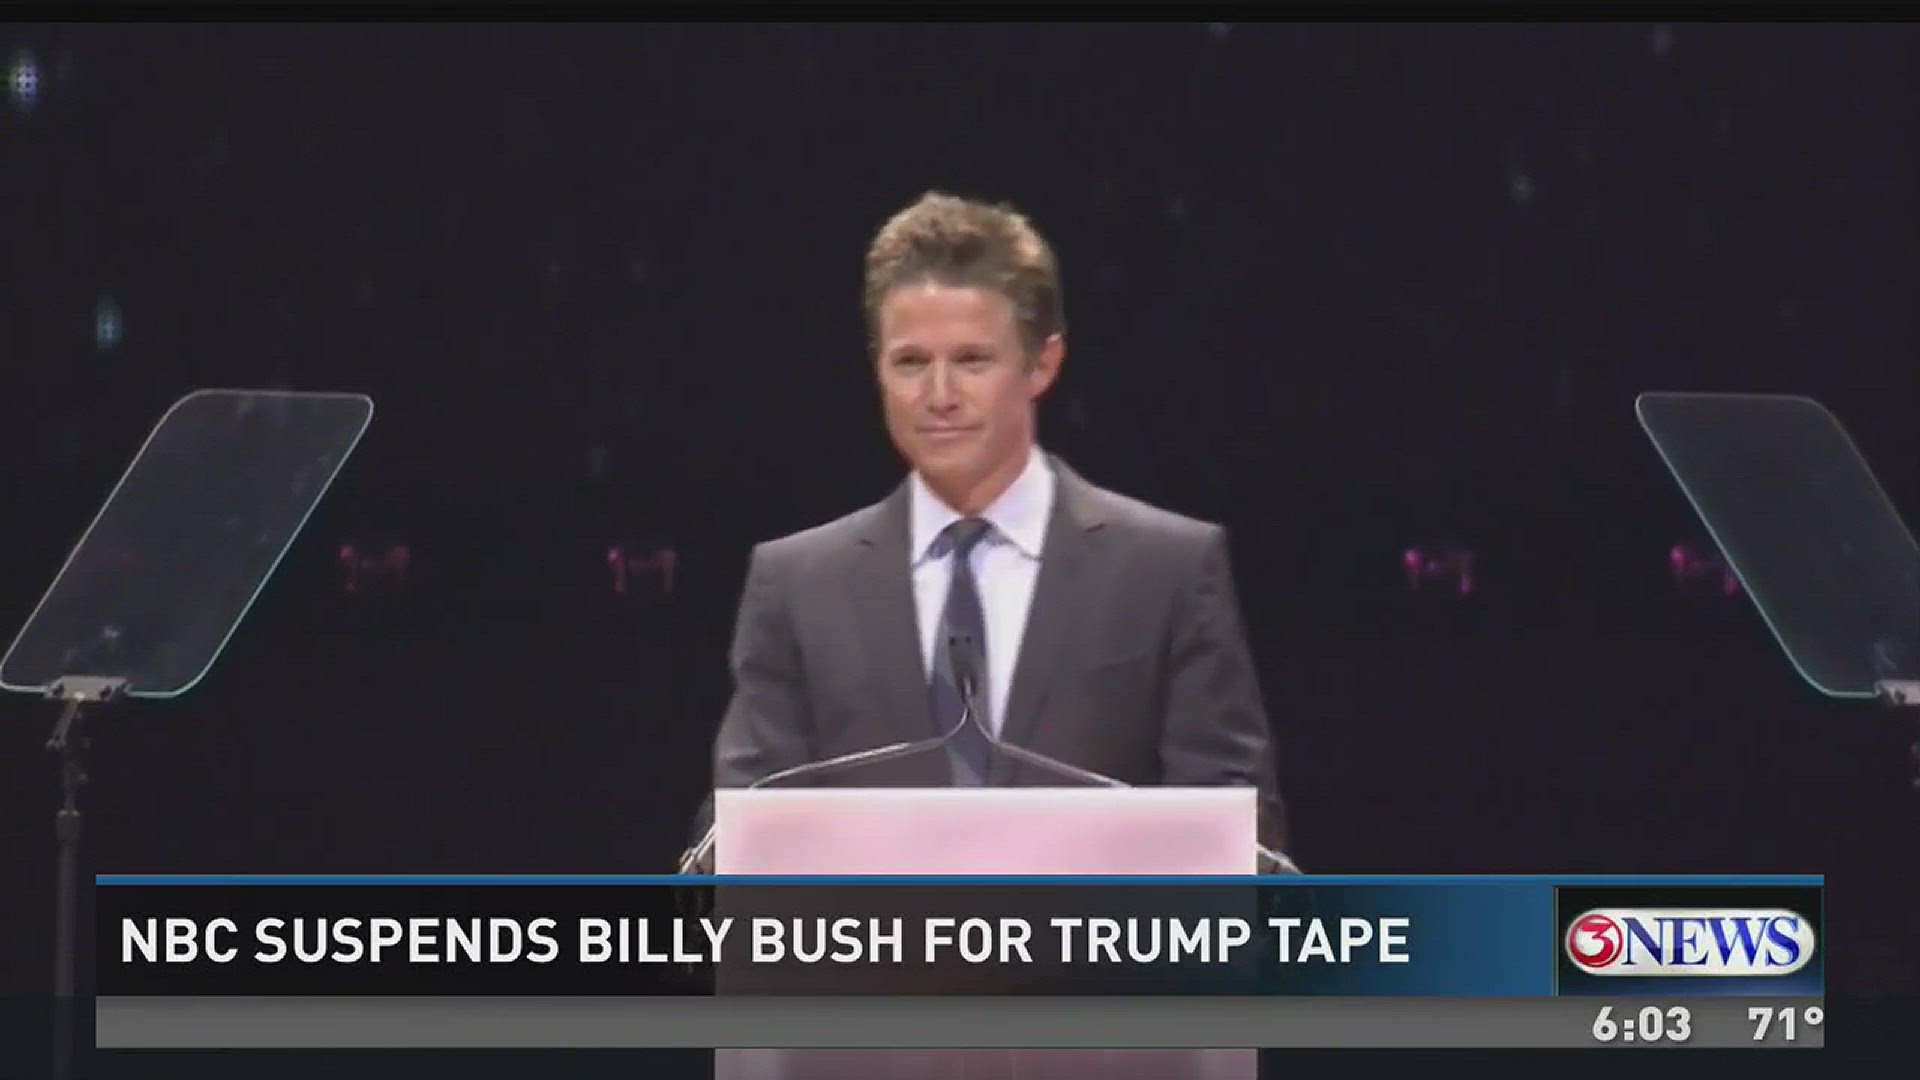 Billy Bush, a host on the "Today" show who has received stinging criticism for his role in a video with Donald J. Trump, has been suspended by NBC.